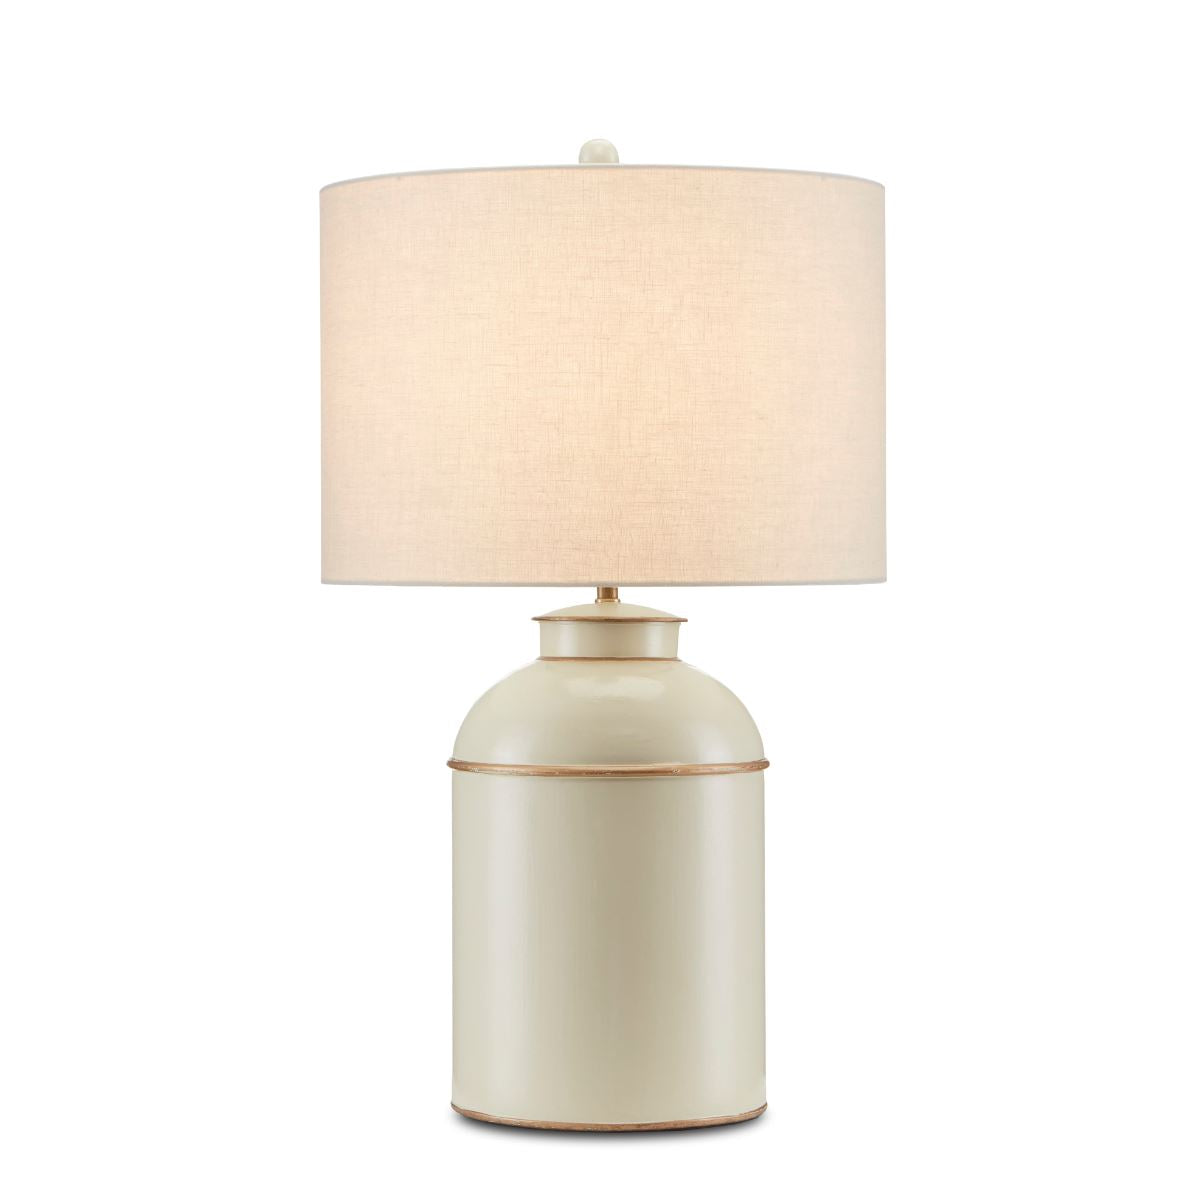 Kai Table Lamp. Light on. Front view.